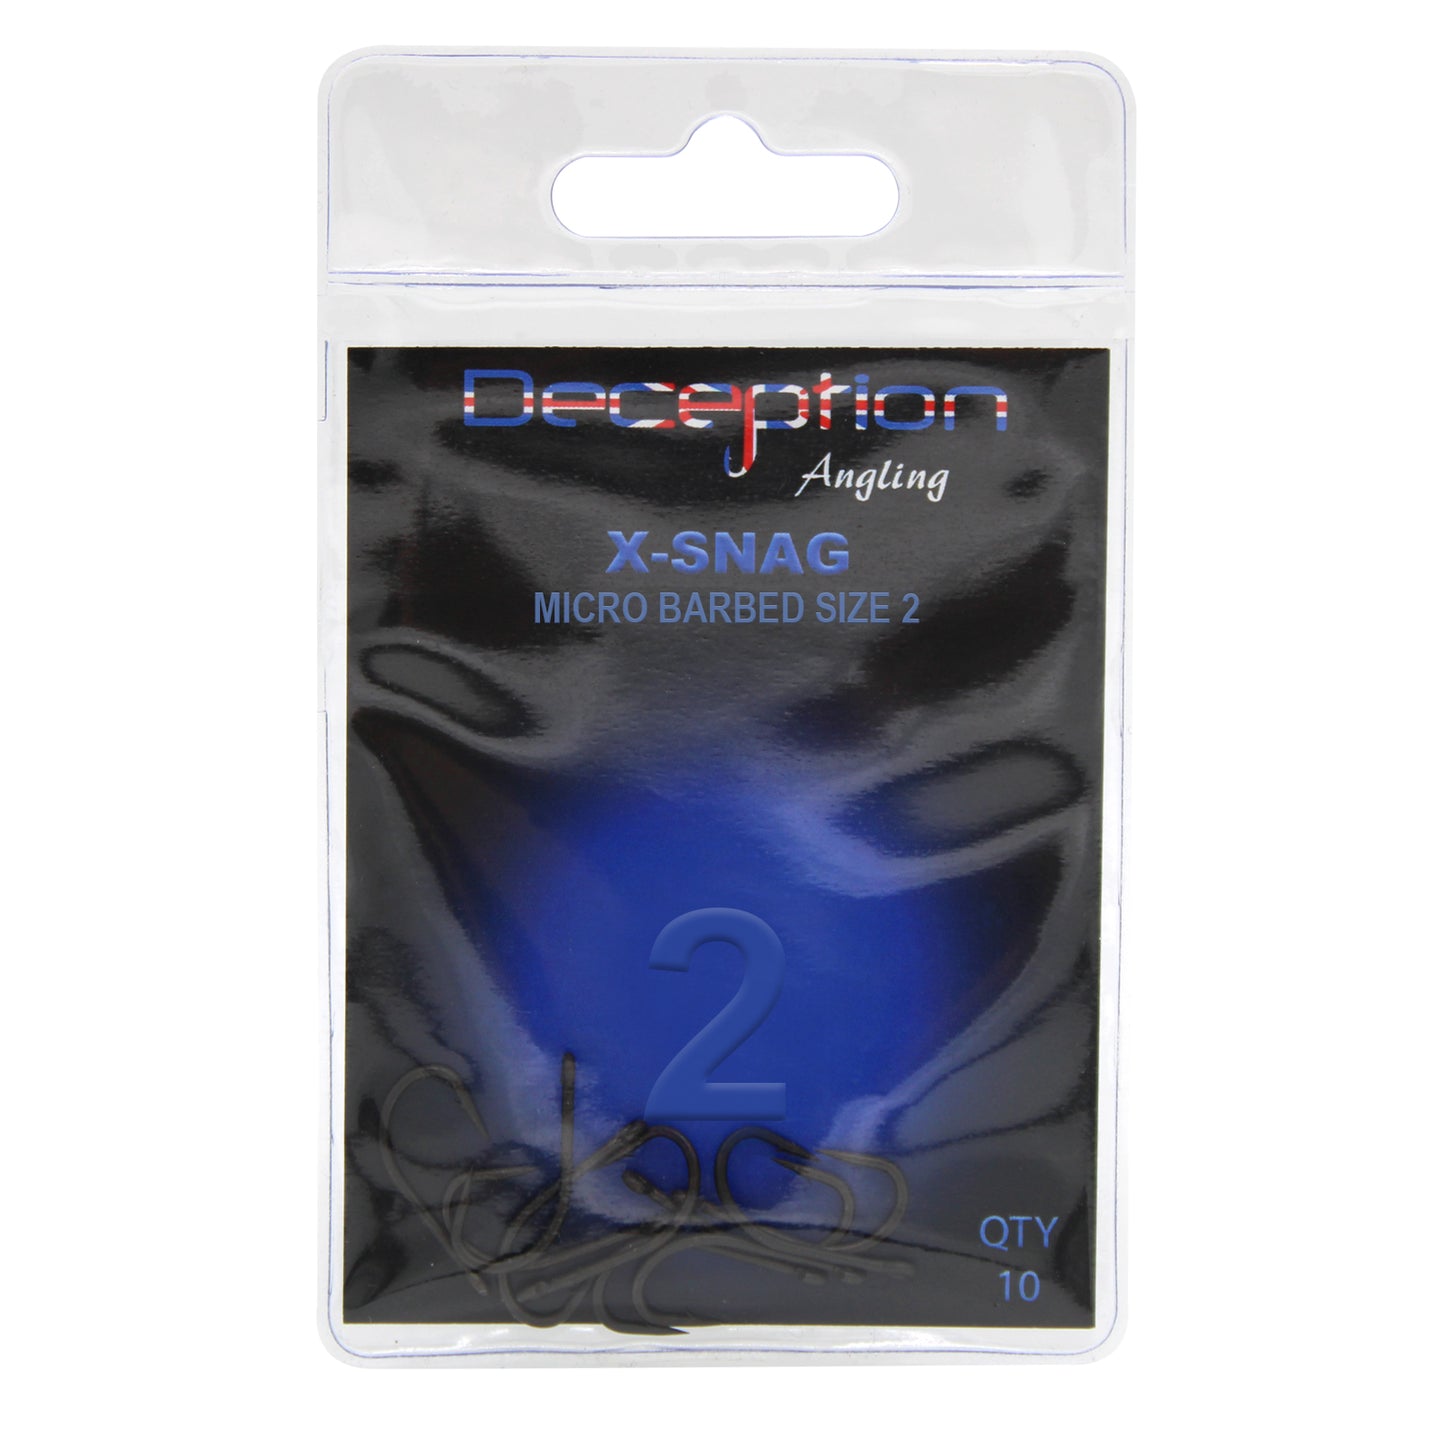 Deception Angling X-Snag Micro Barbed Fishing Hooks Size 2 Pack of 10